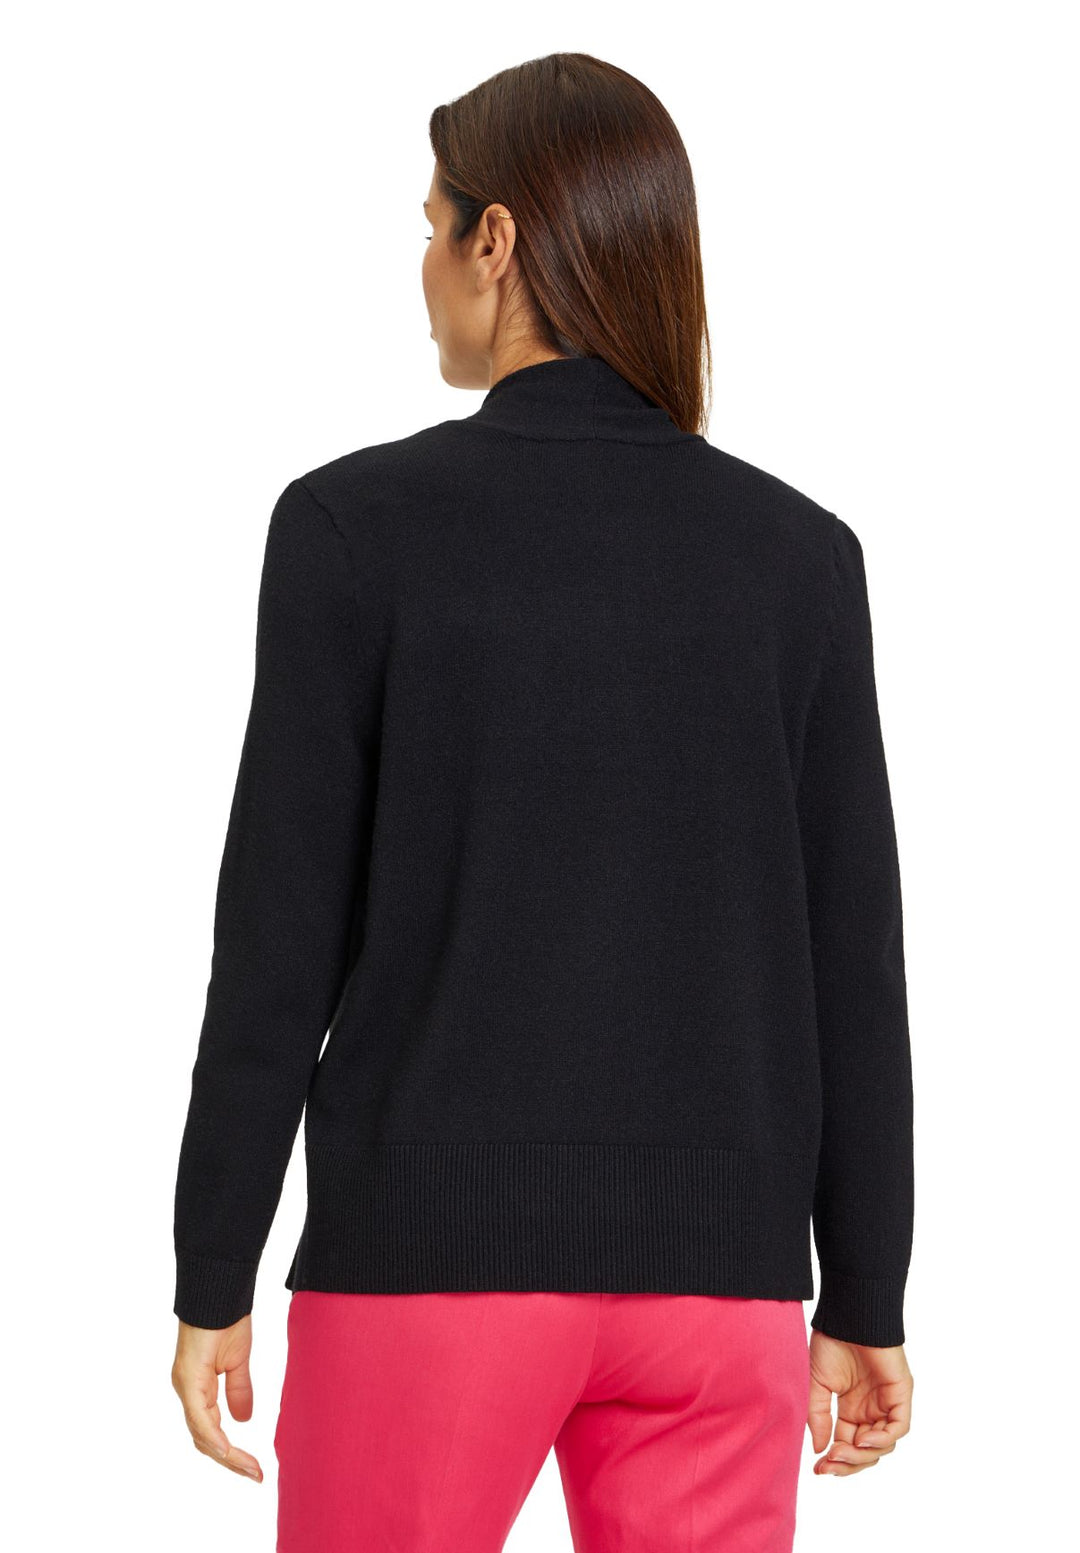 Betty Barclay 5731/1026 Black Knitted Jacket 4